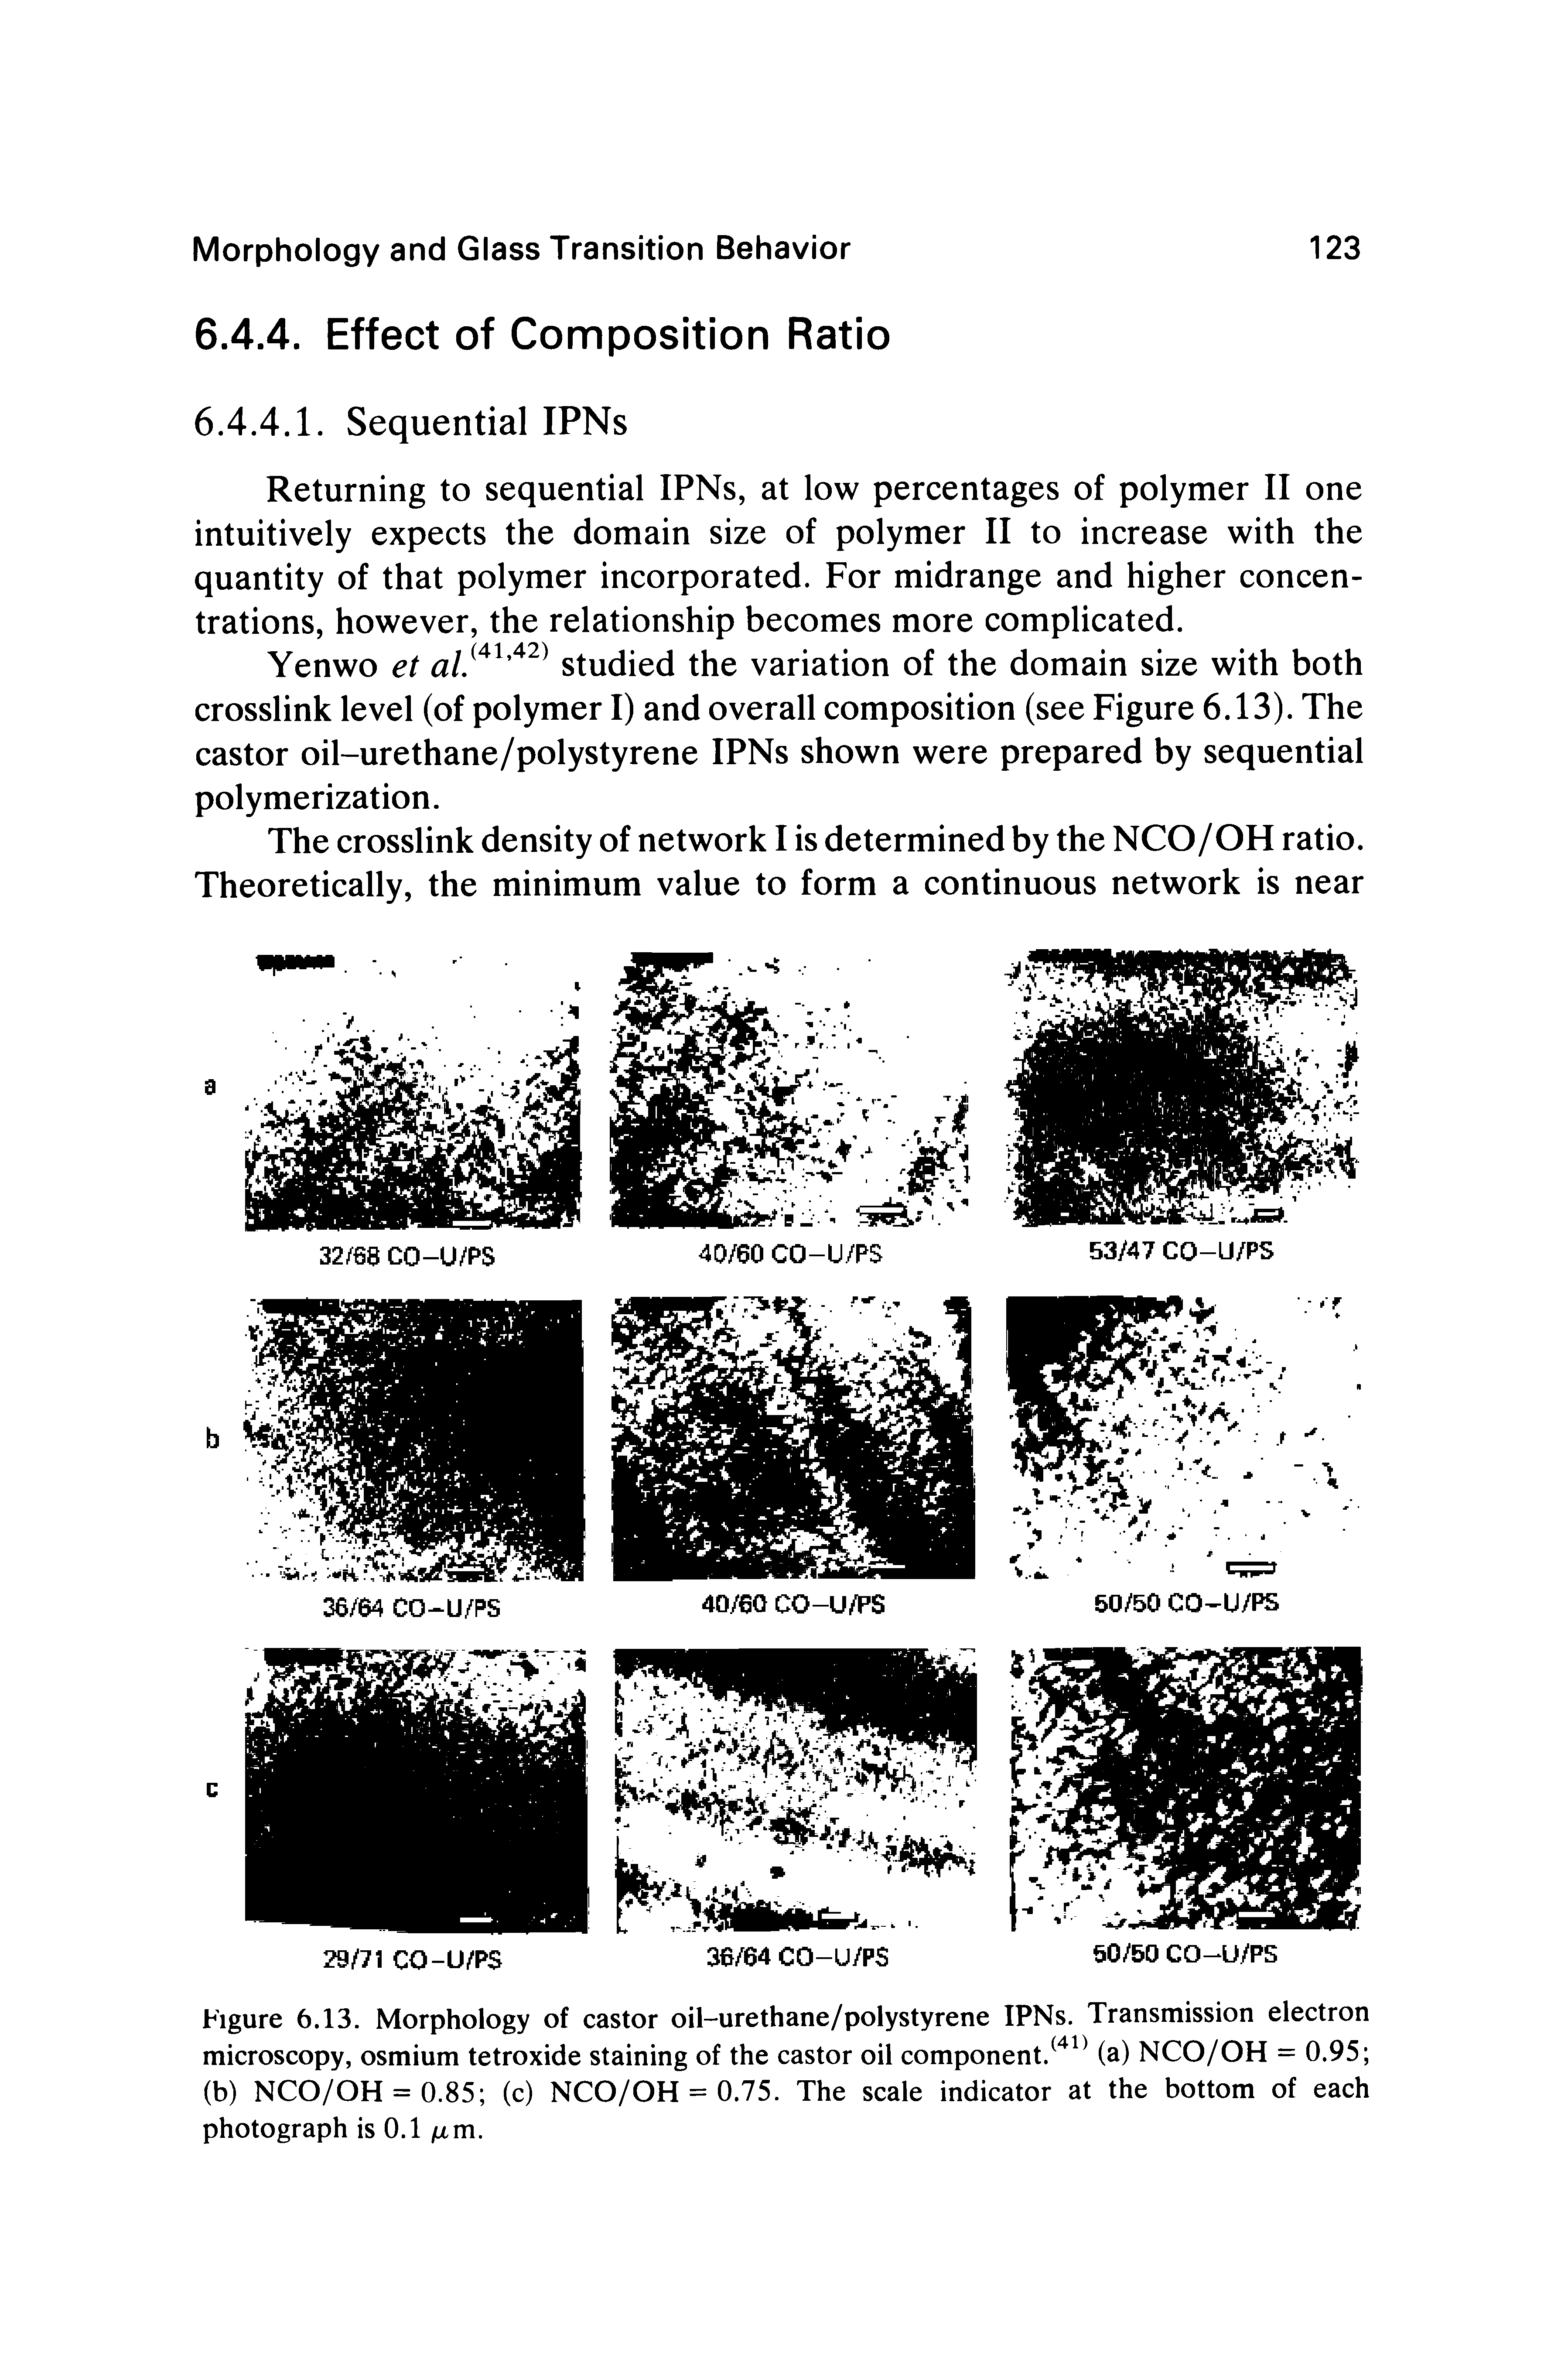 Figure 6.13. Morphology of castor oil-urethane/polystyrene IPNs. Transmission electron microscopy, osmium tetroxide staining of the castor oil component.(a) NCO/OH = 0.95 (b) NCO/OH = 0.85 (c) NCO/OH = 0.75. The scale indicator at the bottom of each photograph is 0.1 /am.